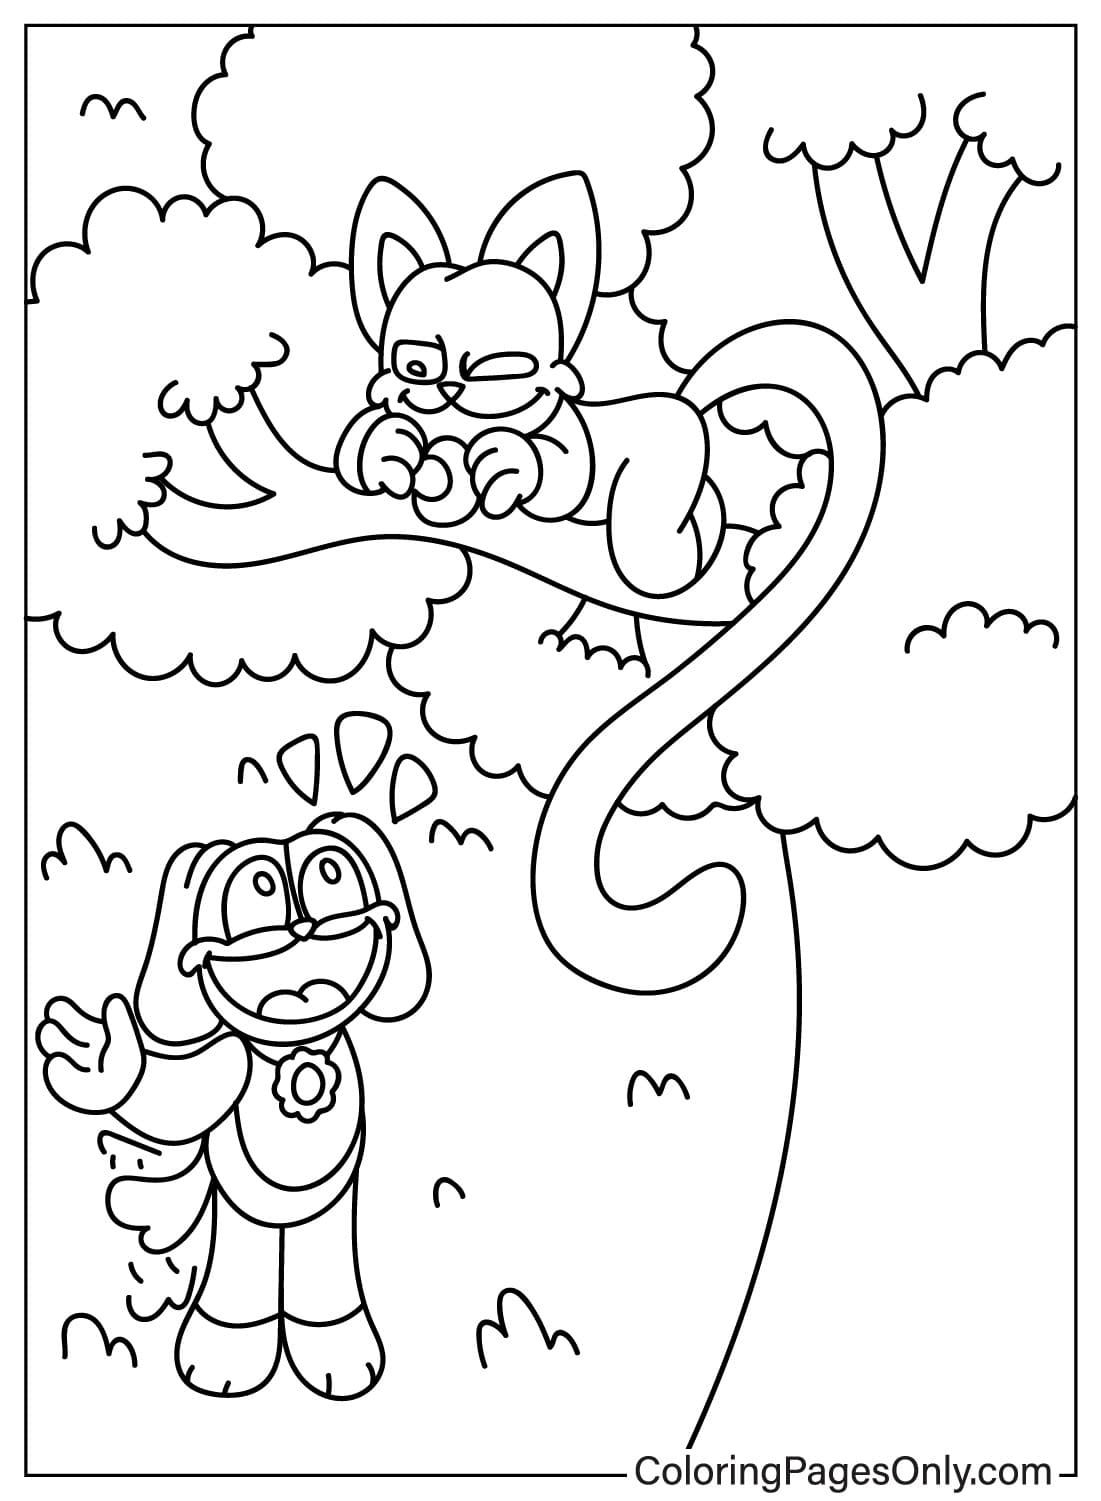 CatNap and DogDay Coloring Page from CatNap